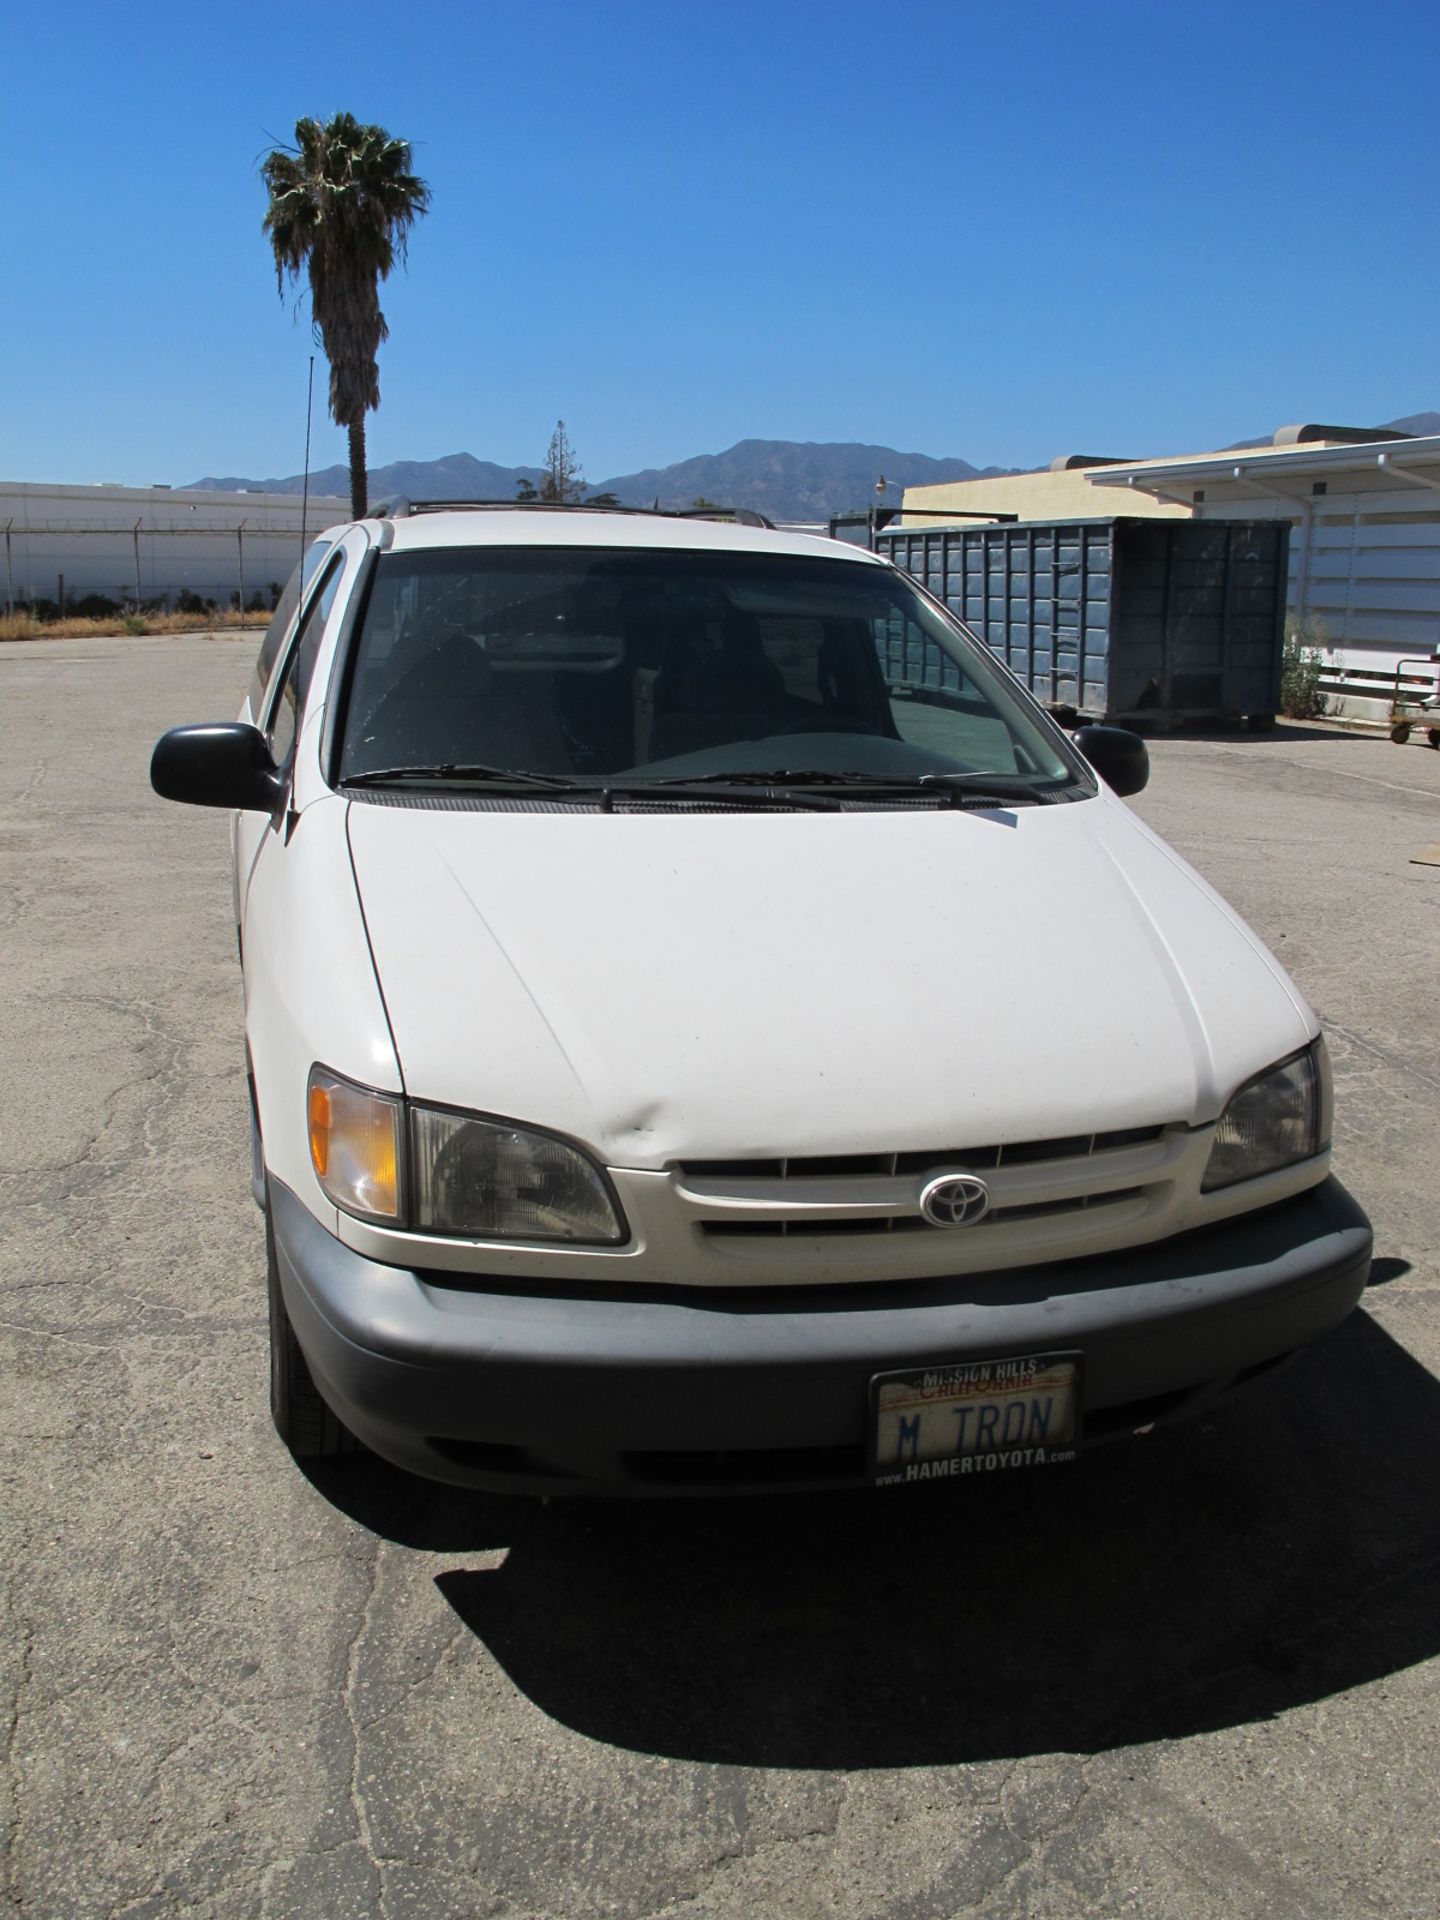 1998 Toyota Sienna LE Van Lisc# MTRON w/ Gas Engine, Automatic Trans,Milles 273,350 AC, VIN# - Image 2 of 8